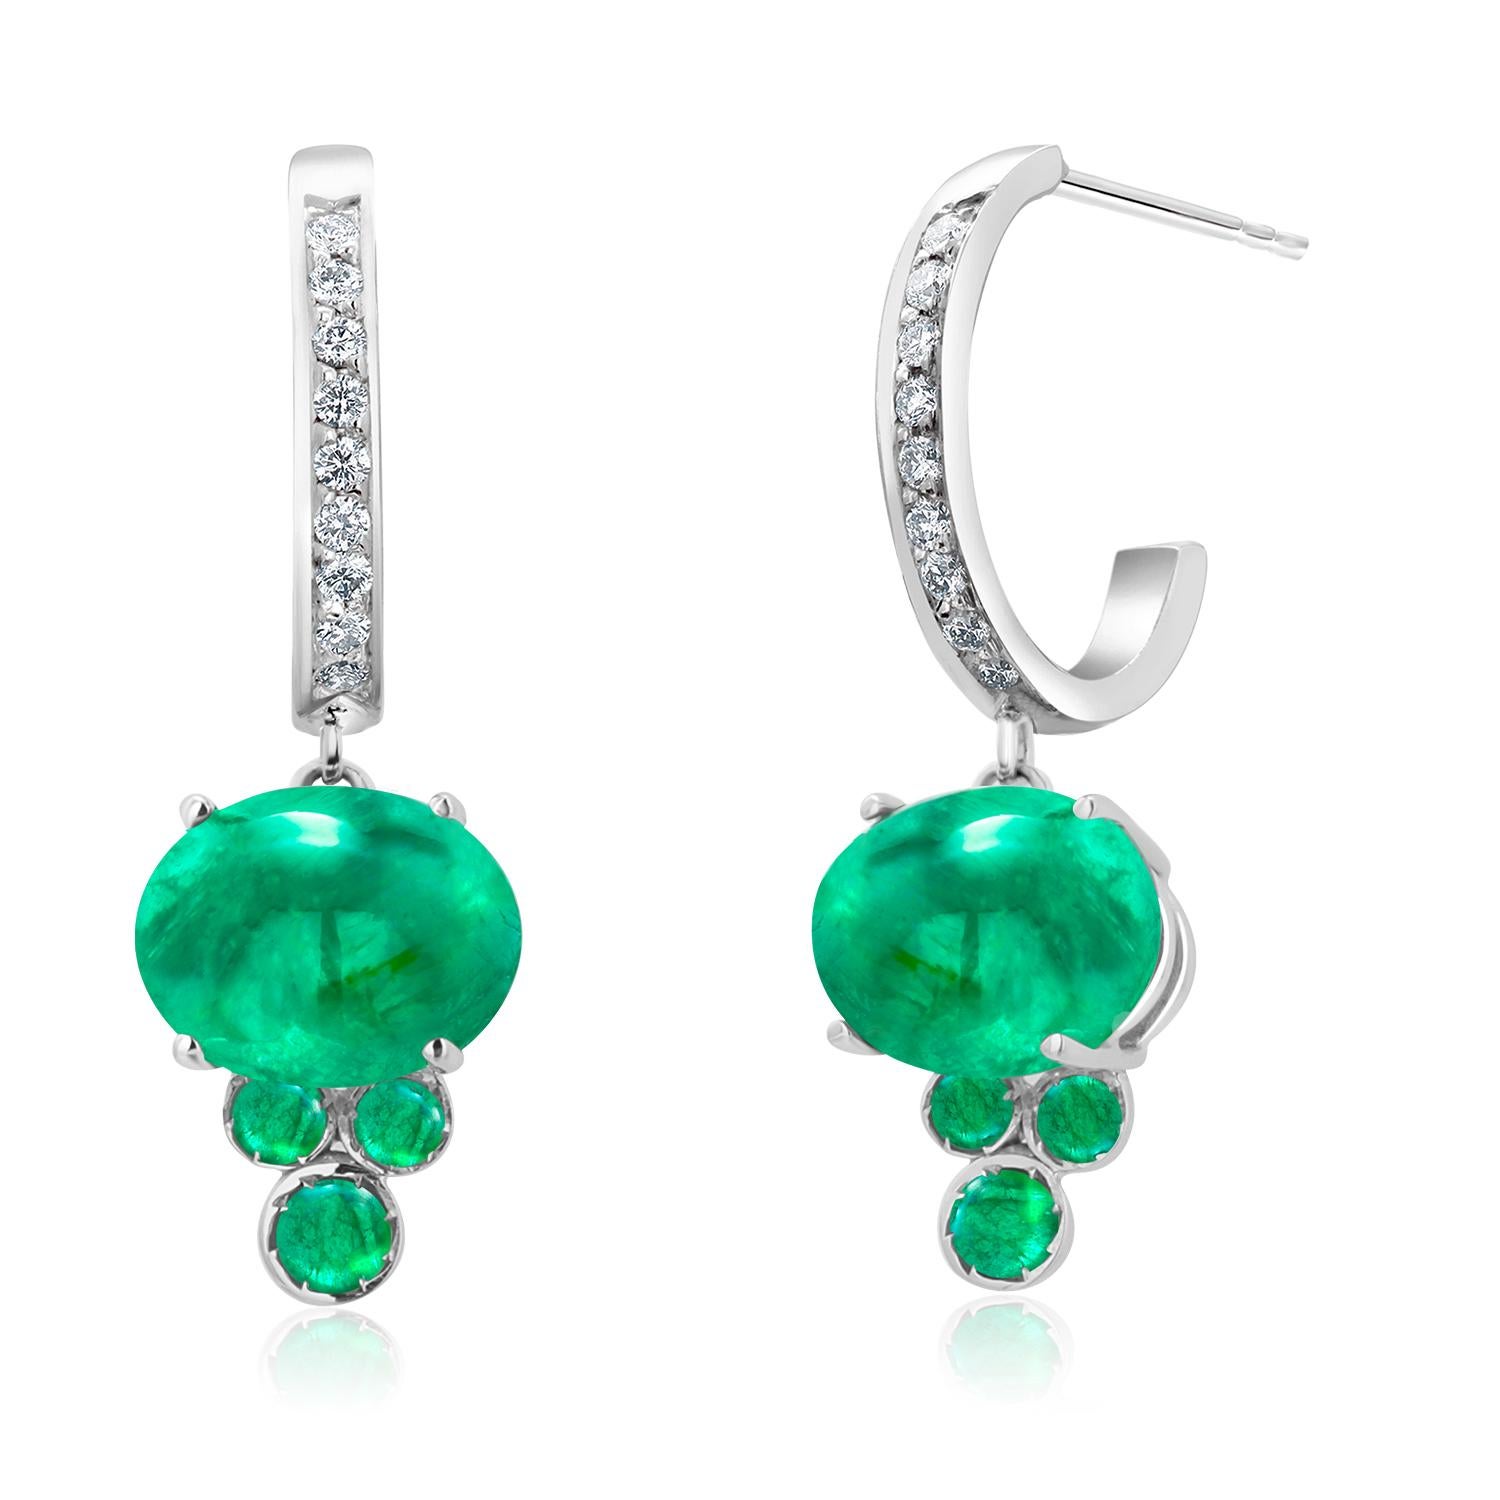 White Gold Diamond 1 Inch Long Earrings Cabochon Emeralds weighing 4.70 Carat For Sale 2